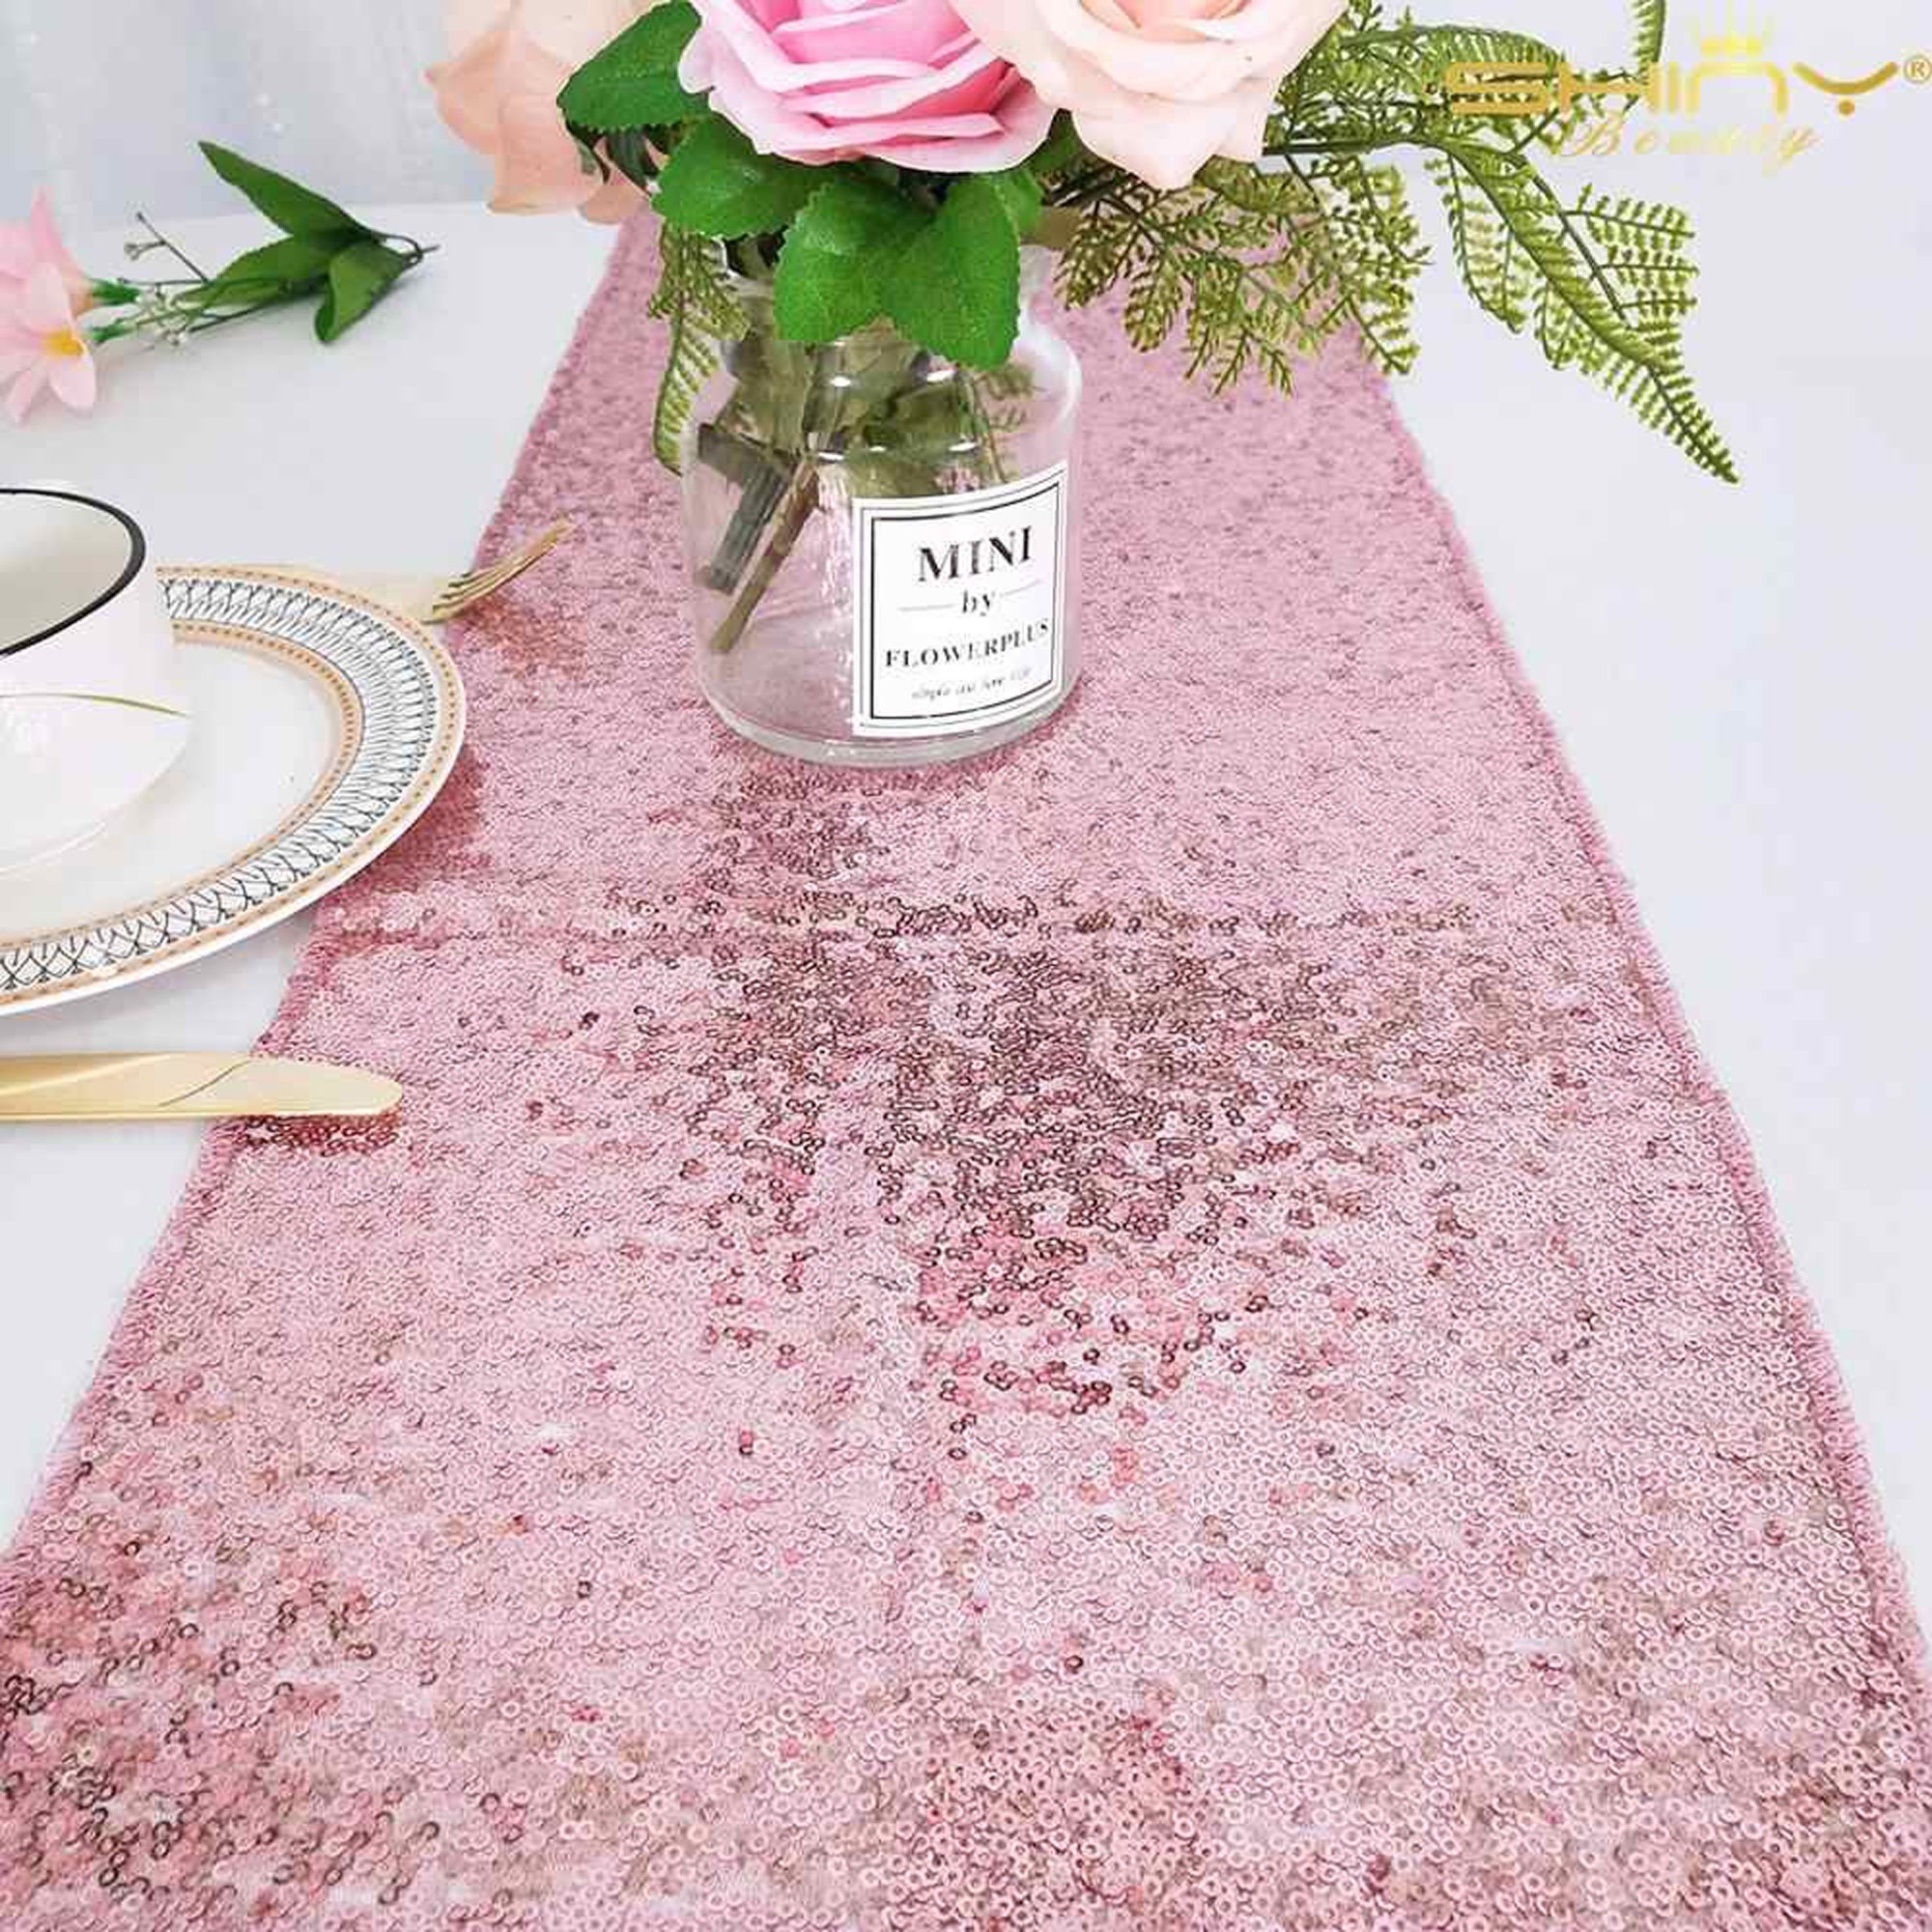 Pink Sequins Sparkling Glitzy Shimmery Table Cloth Runner for | Etsy